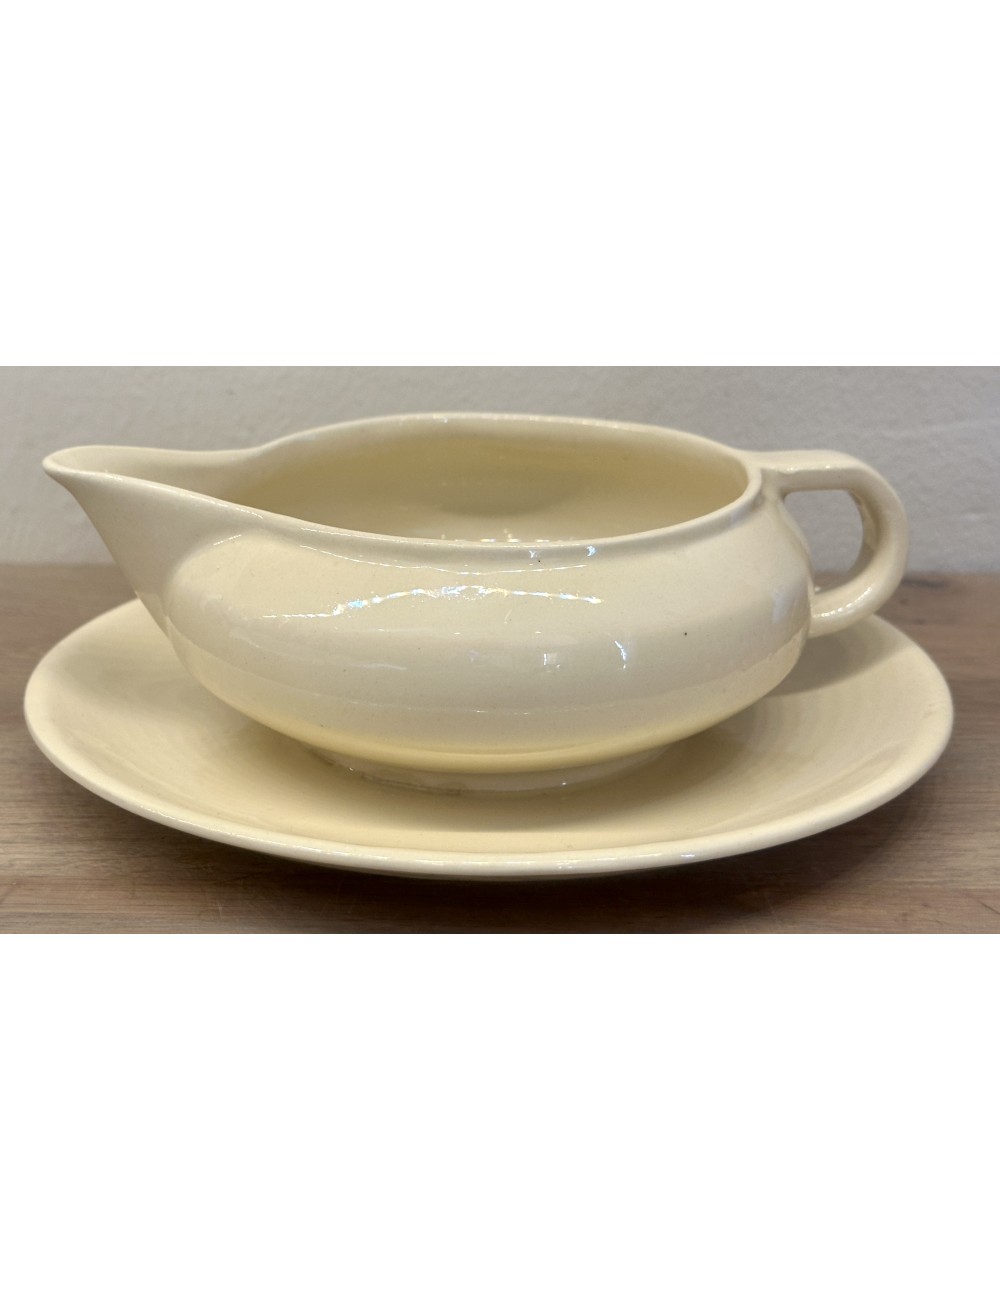 Gravy boat / Sauce boat - Petrus Regout - dated 1941 - executed in cream without further decoration